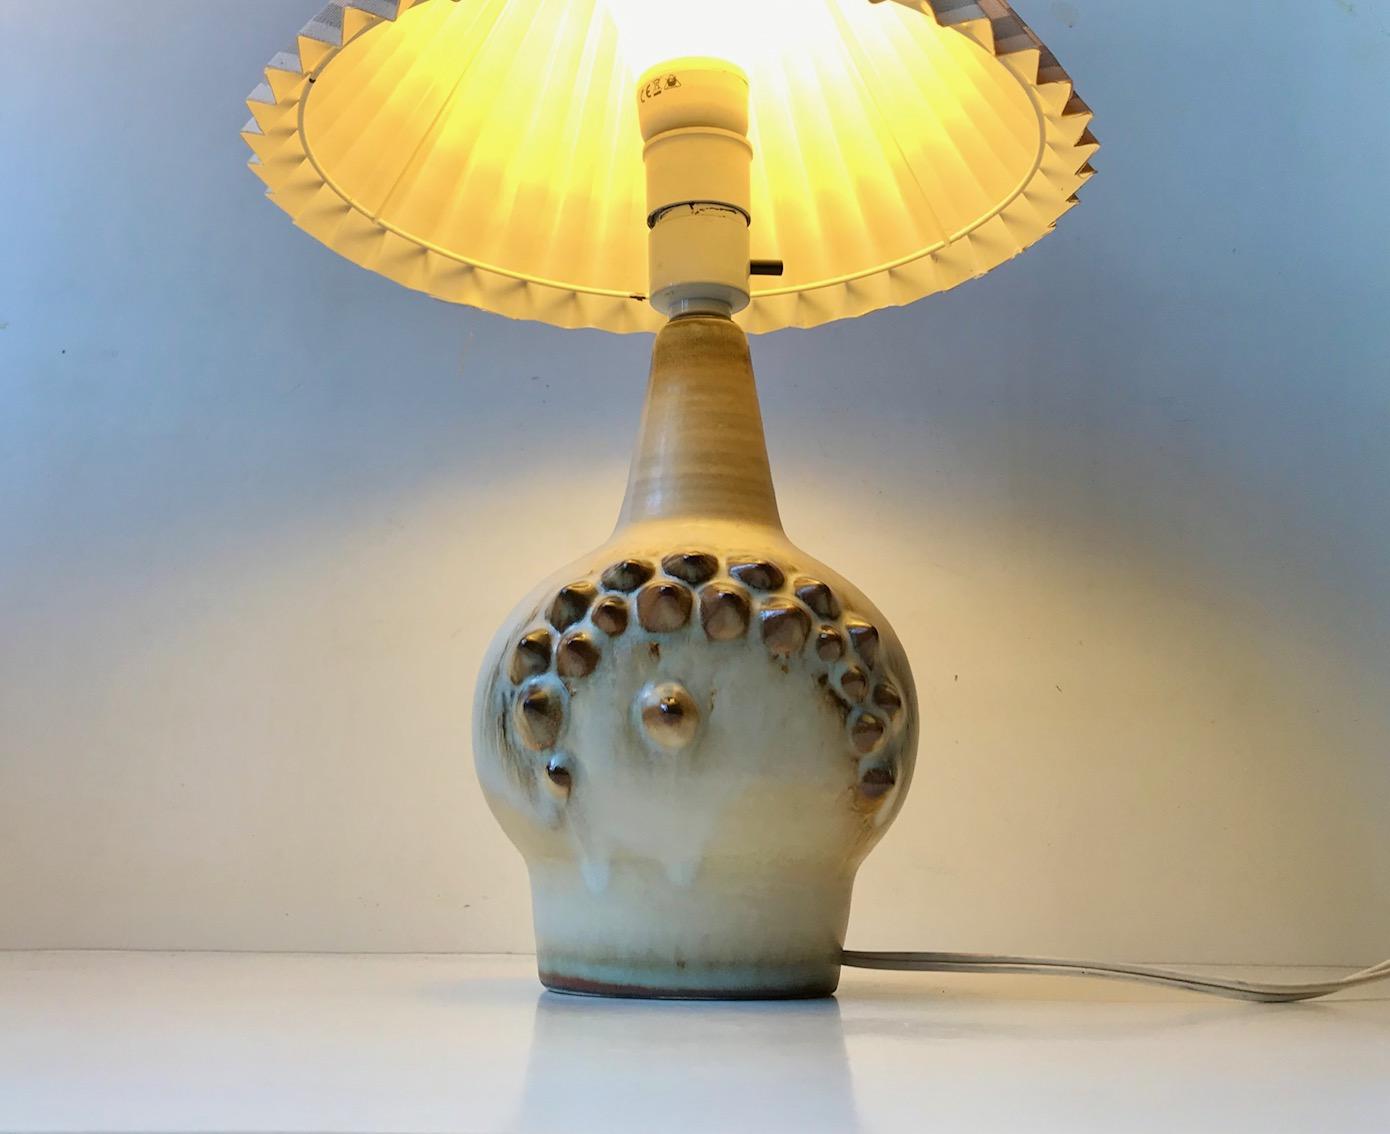 Softly 'mother of pearl' glazed stoneware table lamp with Tactile Spikes. It was designed by the danish ceramist Einar Johansen in the 1960s and manufactured by Søholm. Signed EJ to the base. Beautiful intact vintage condition. Its style is very